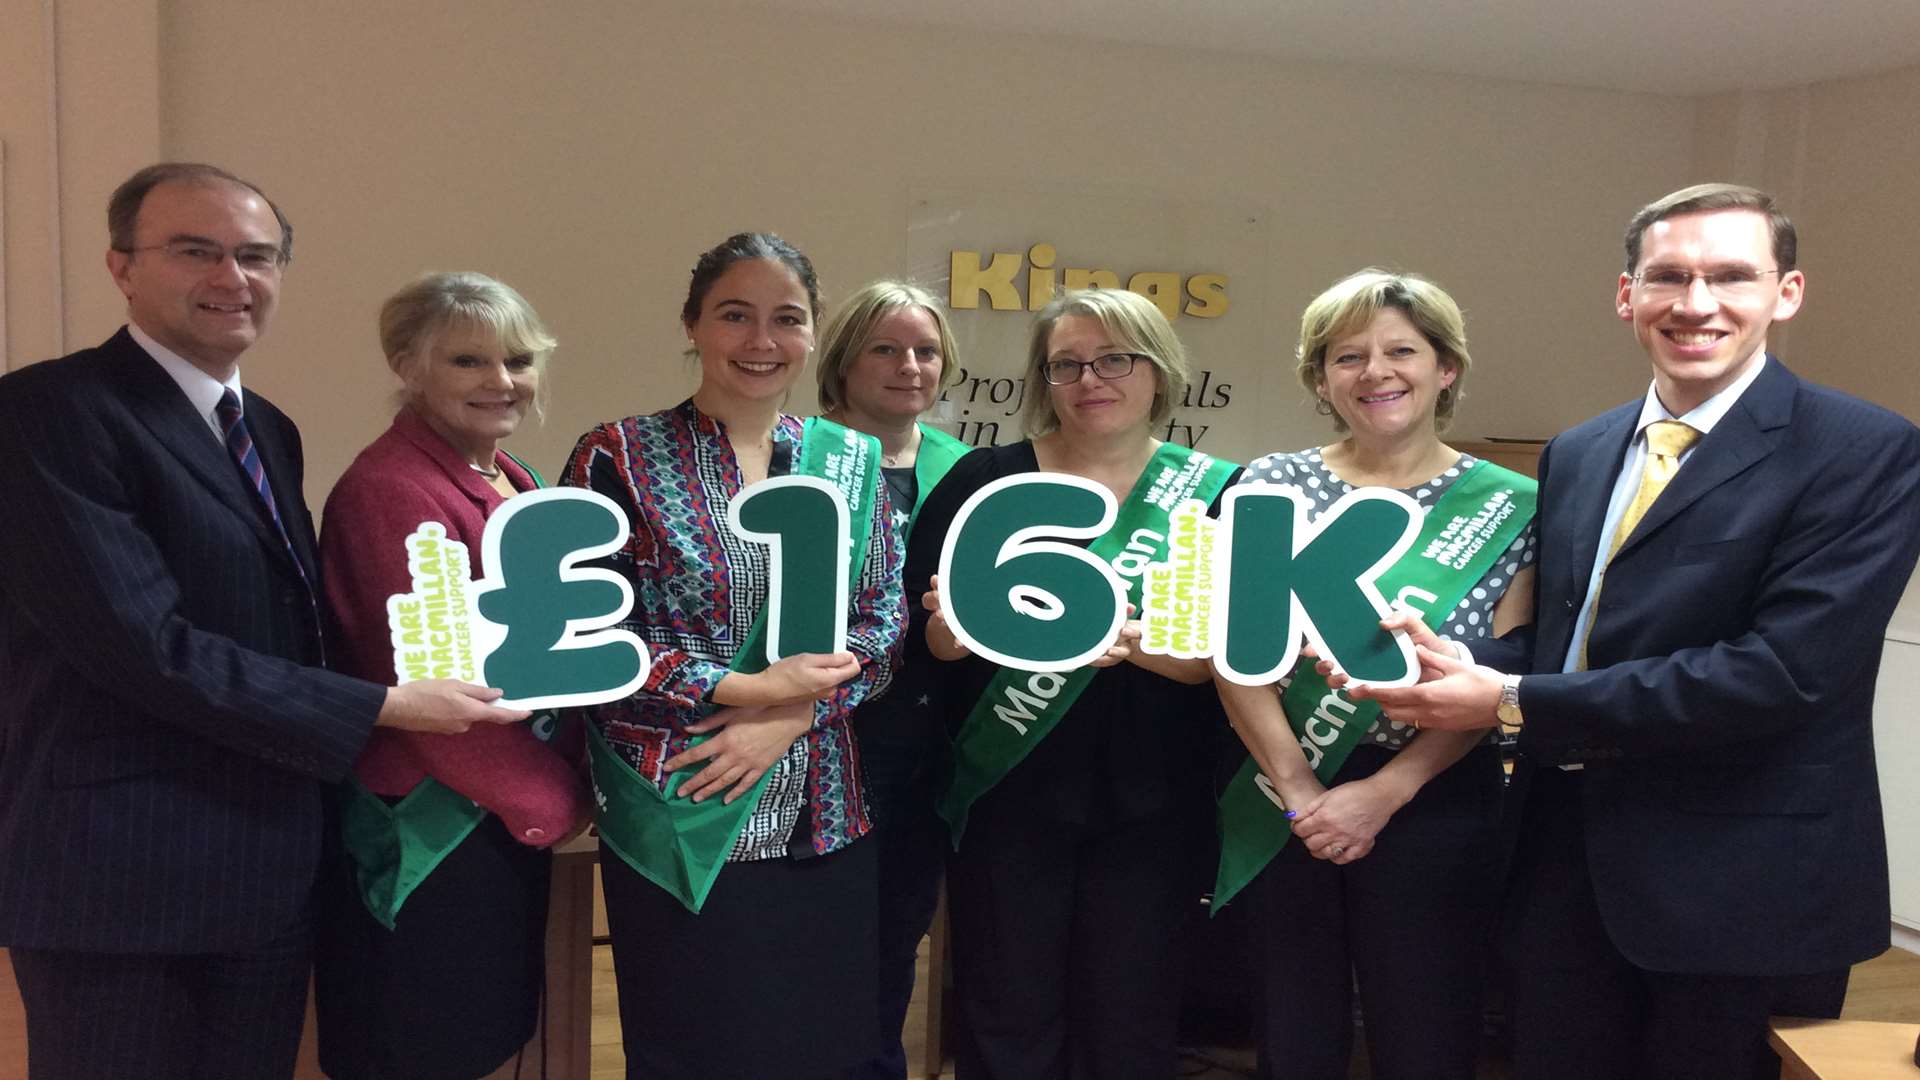 Staff at a number of branches have collectively raised over £16,000